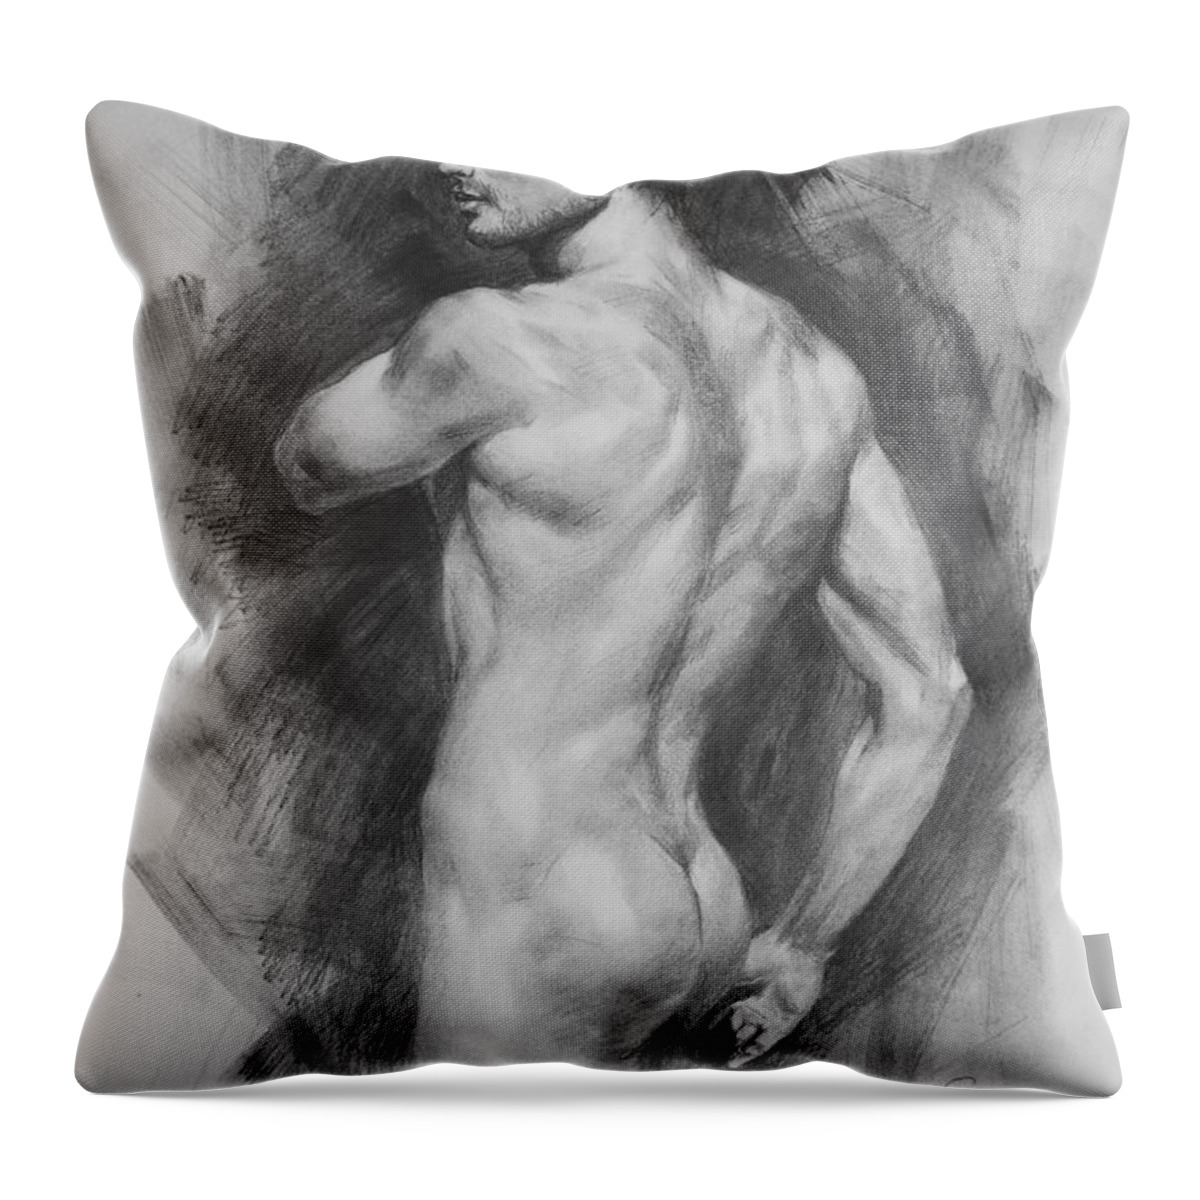 Original Sketch Throw Pillow featuring the painting Original Drawing Sketch Male Nude Gay Man Art Pencil On Paper By Hongtao by Hongtao Huang